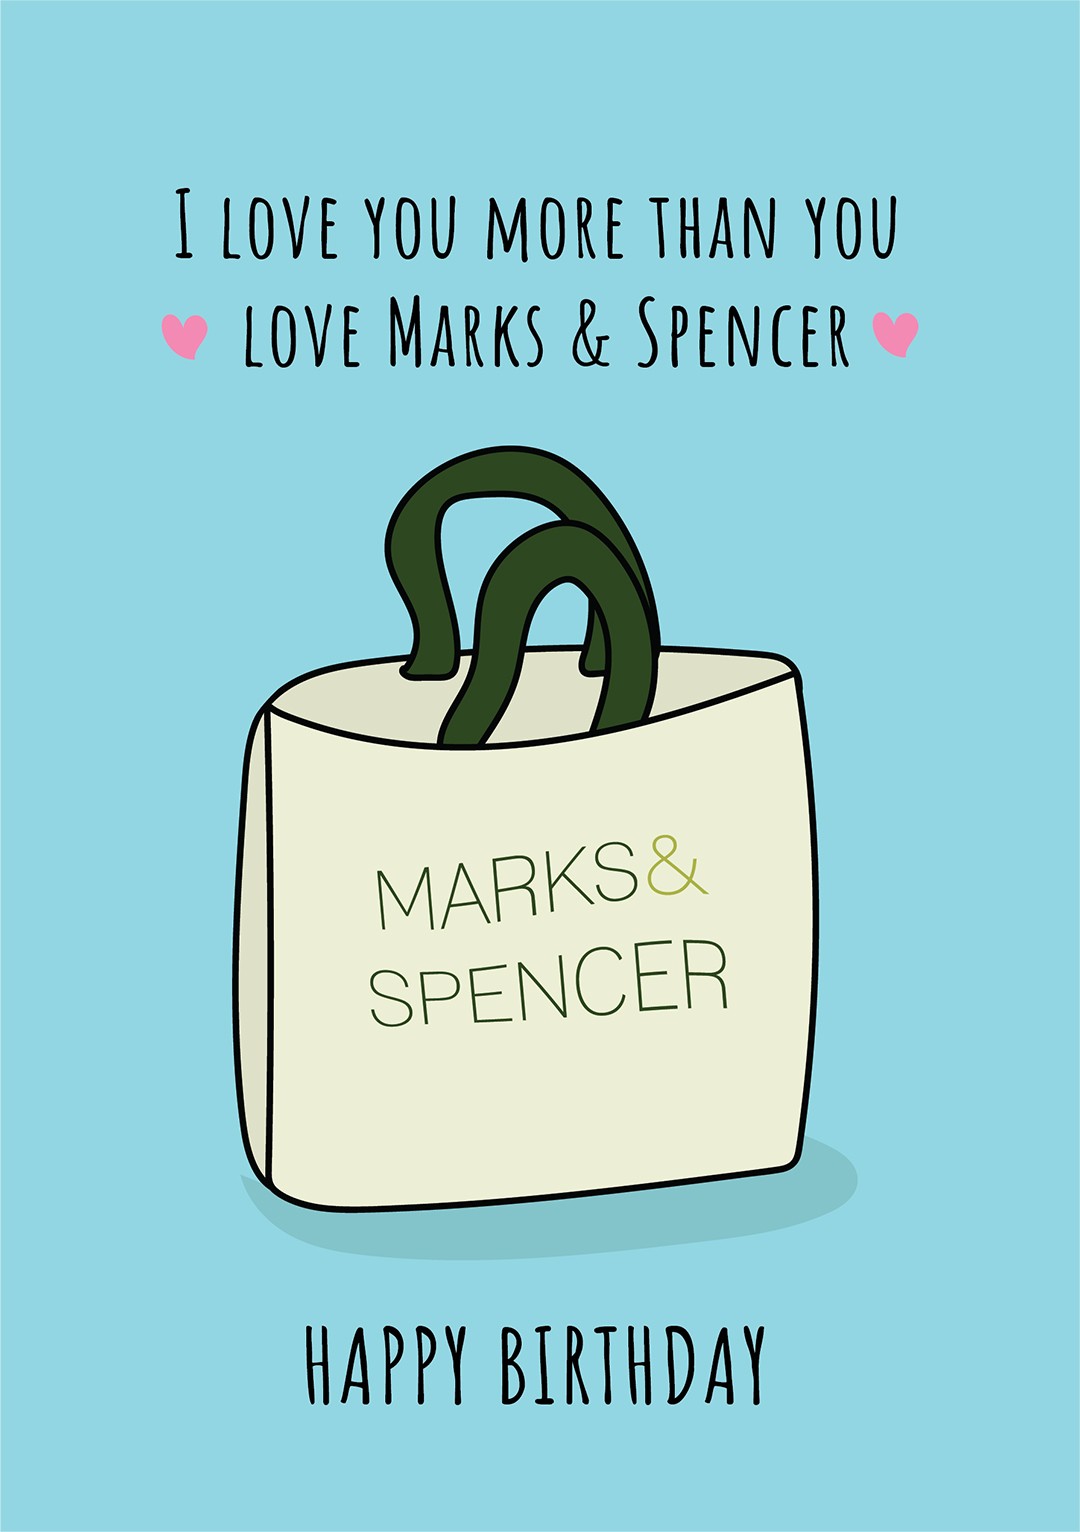 Marks and Spencer - In a relationship that makes you feel more